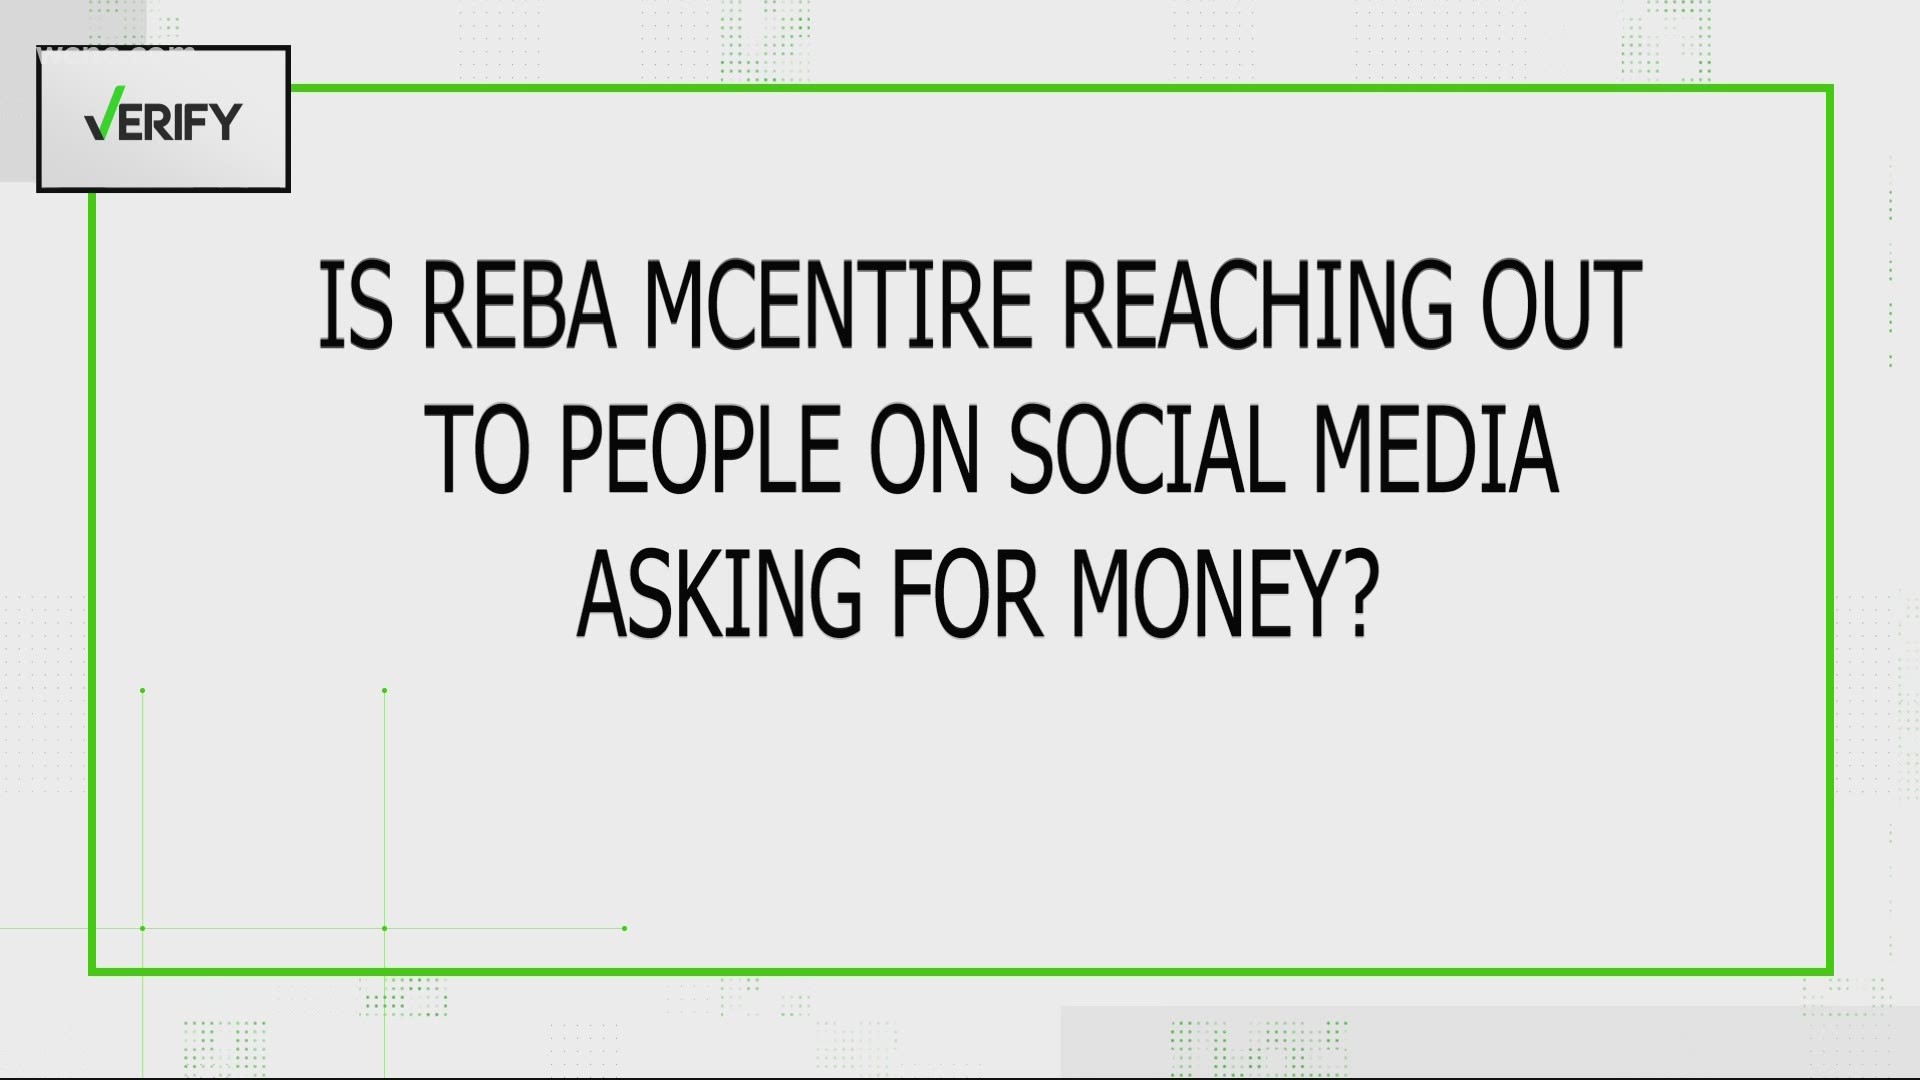 Meghan Bragg works to #VERIFY that no, Reba isn't asking for your money.